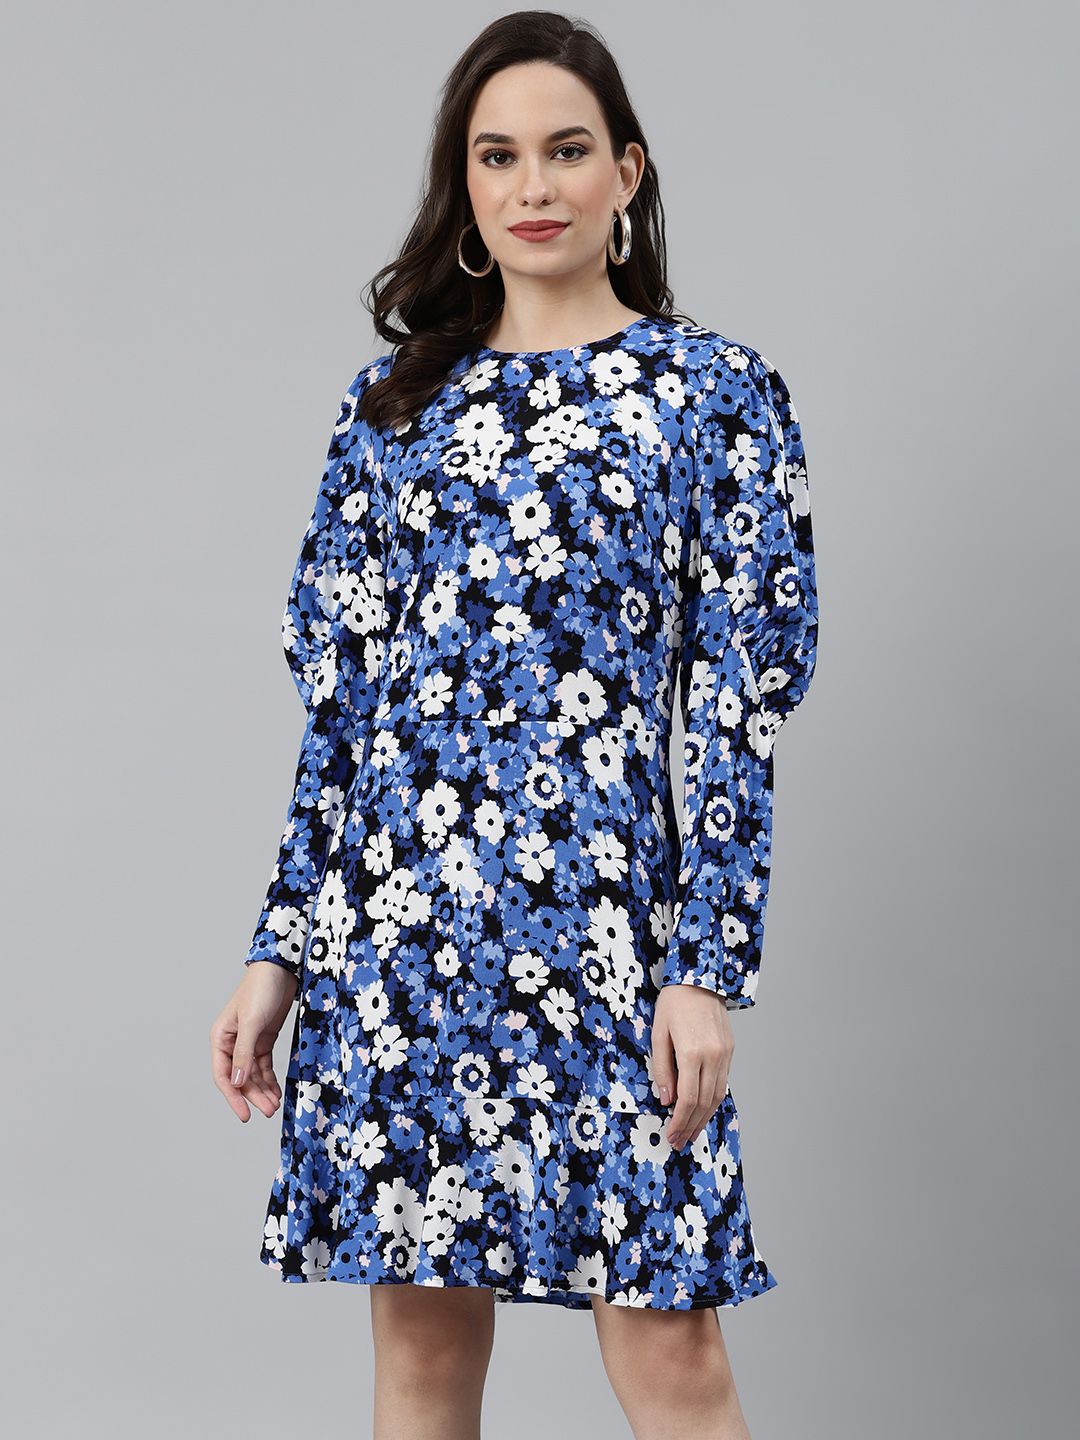 Marks & Spencer Women Blue & White Floral Printed A-Line Dress Price in India